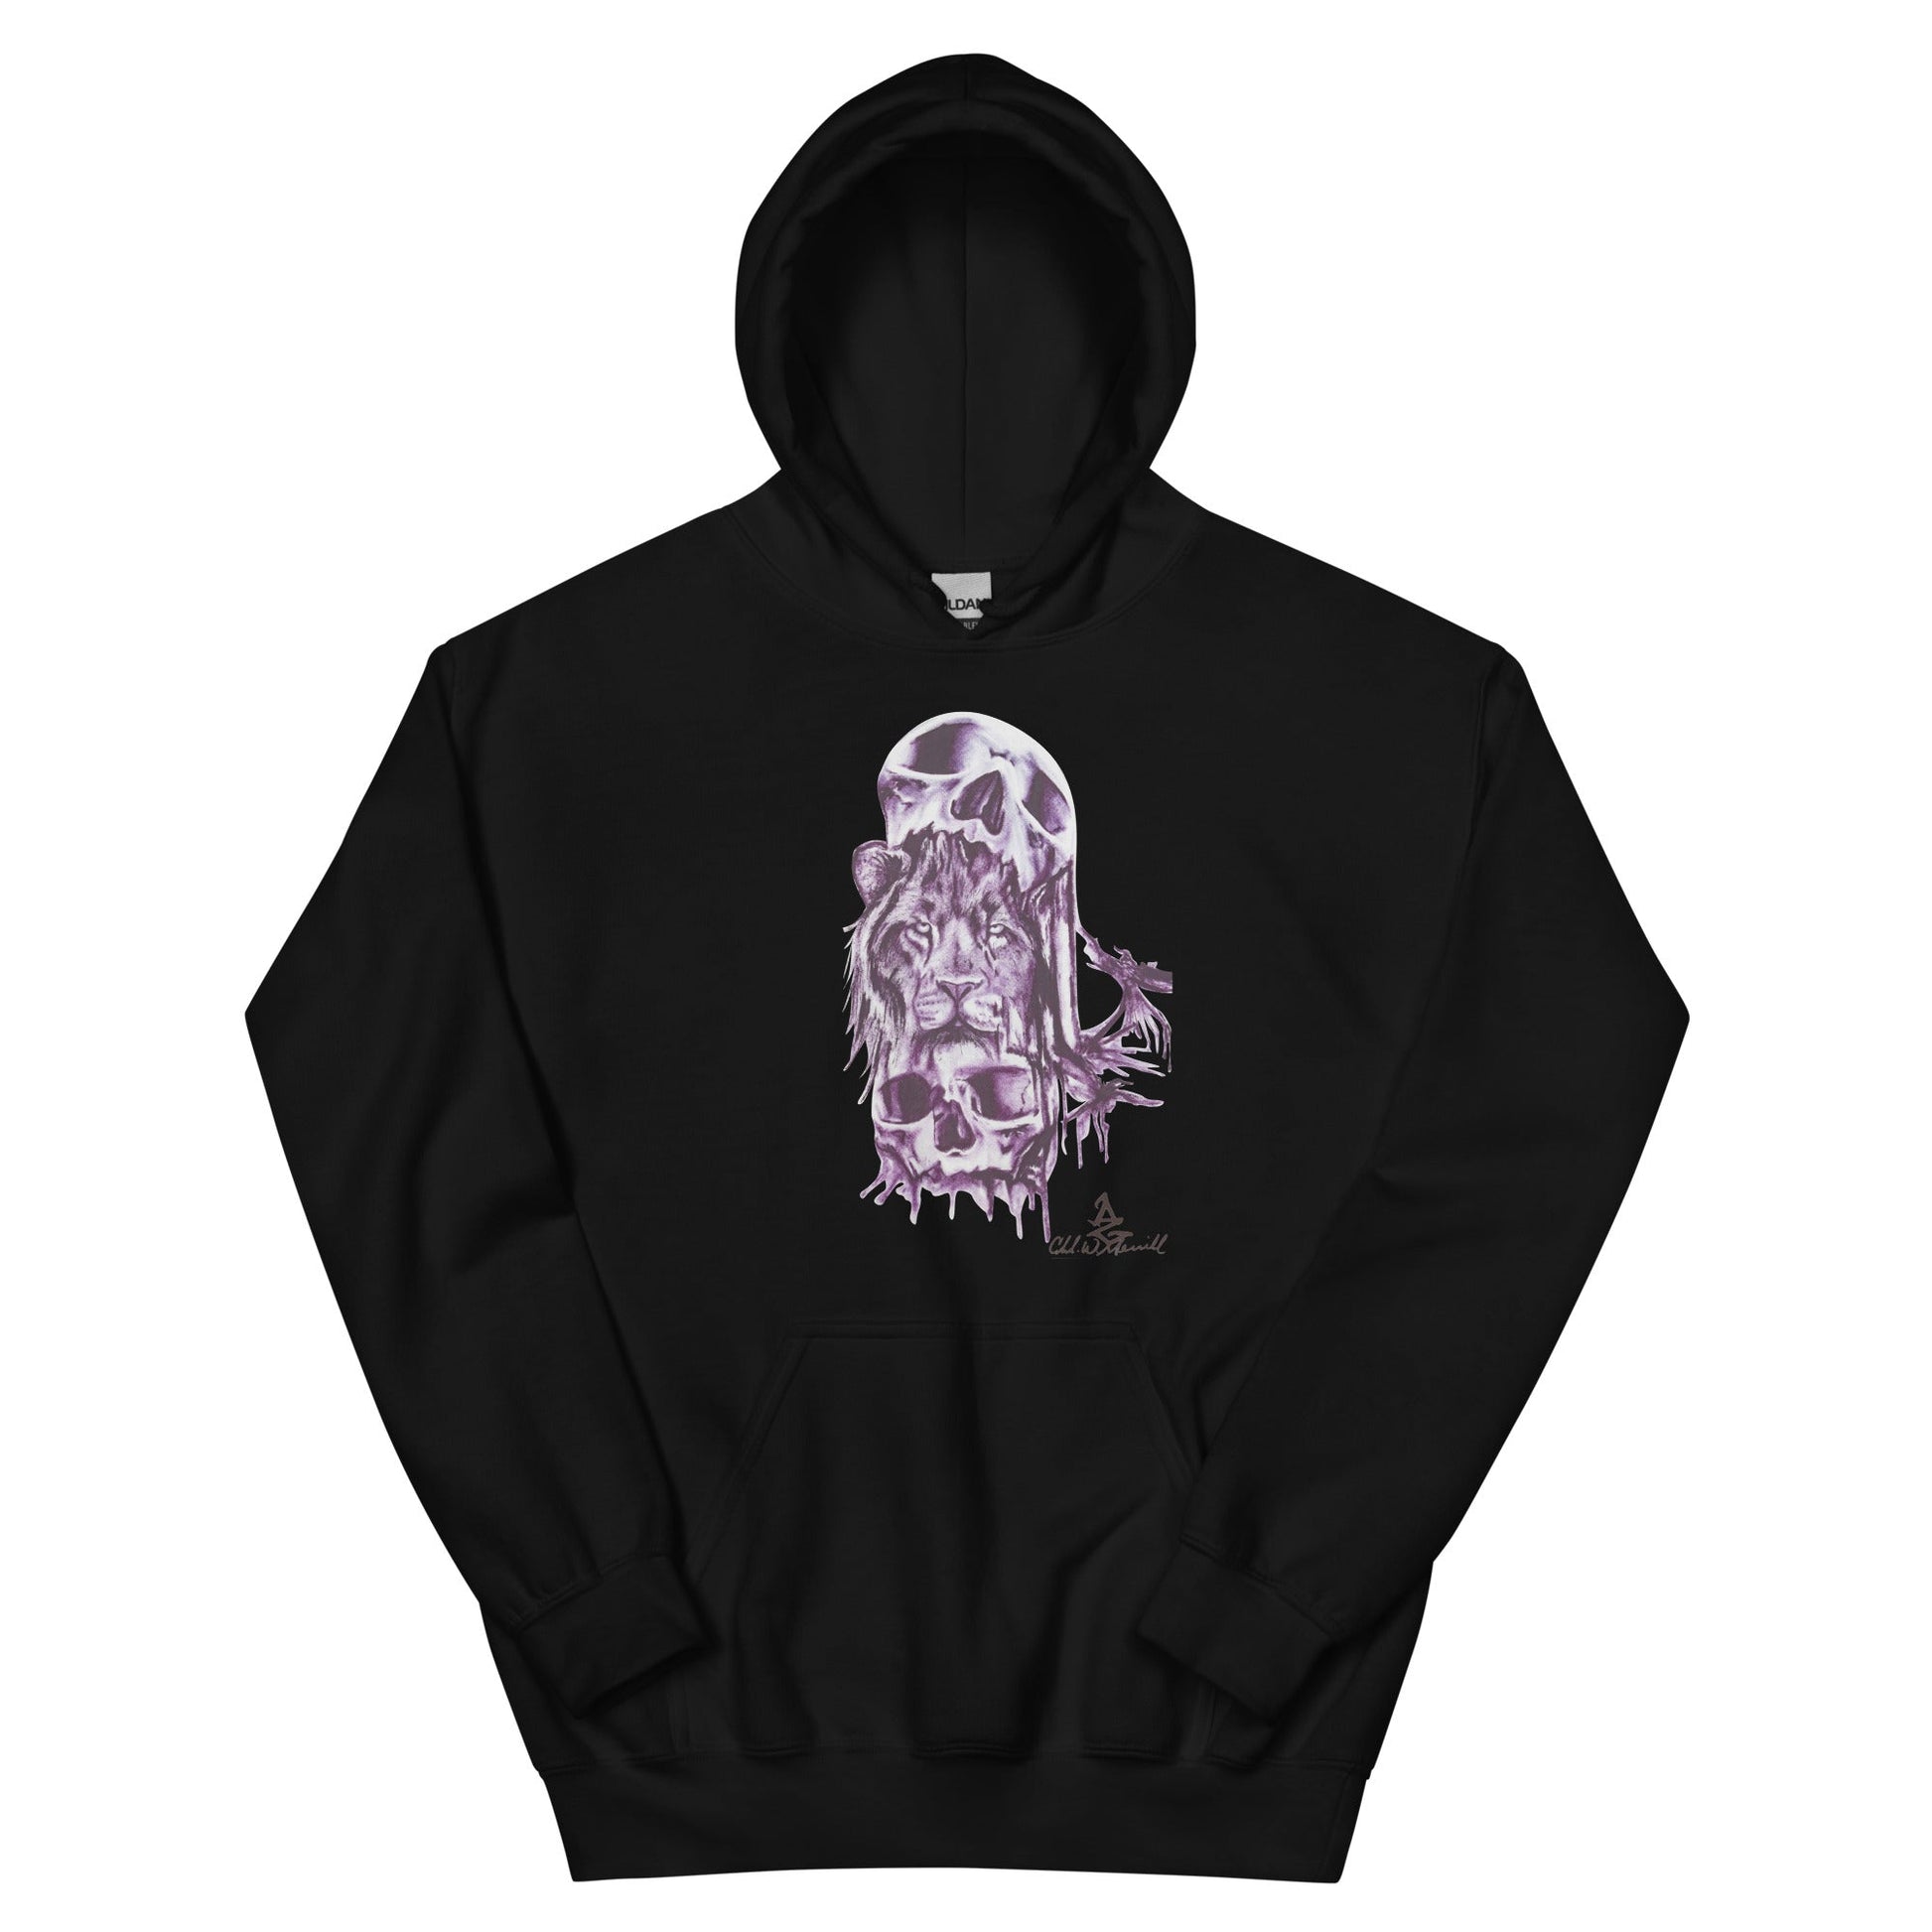 "King nothing" prison art Print on Demand Chad Merrill Hoodie Small